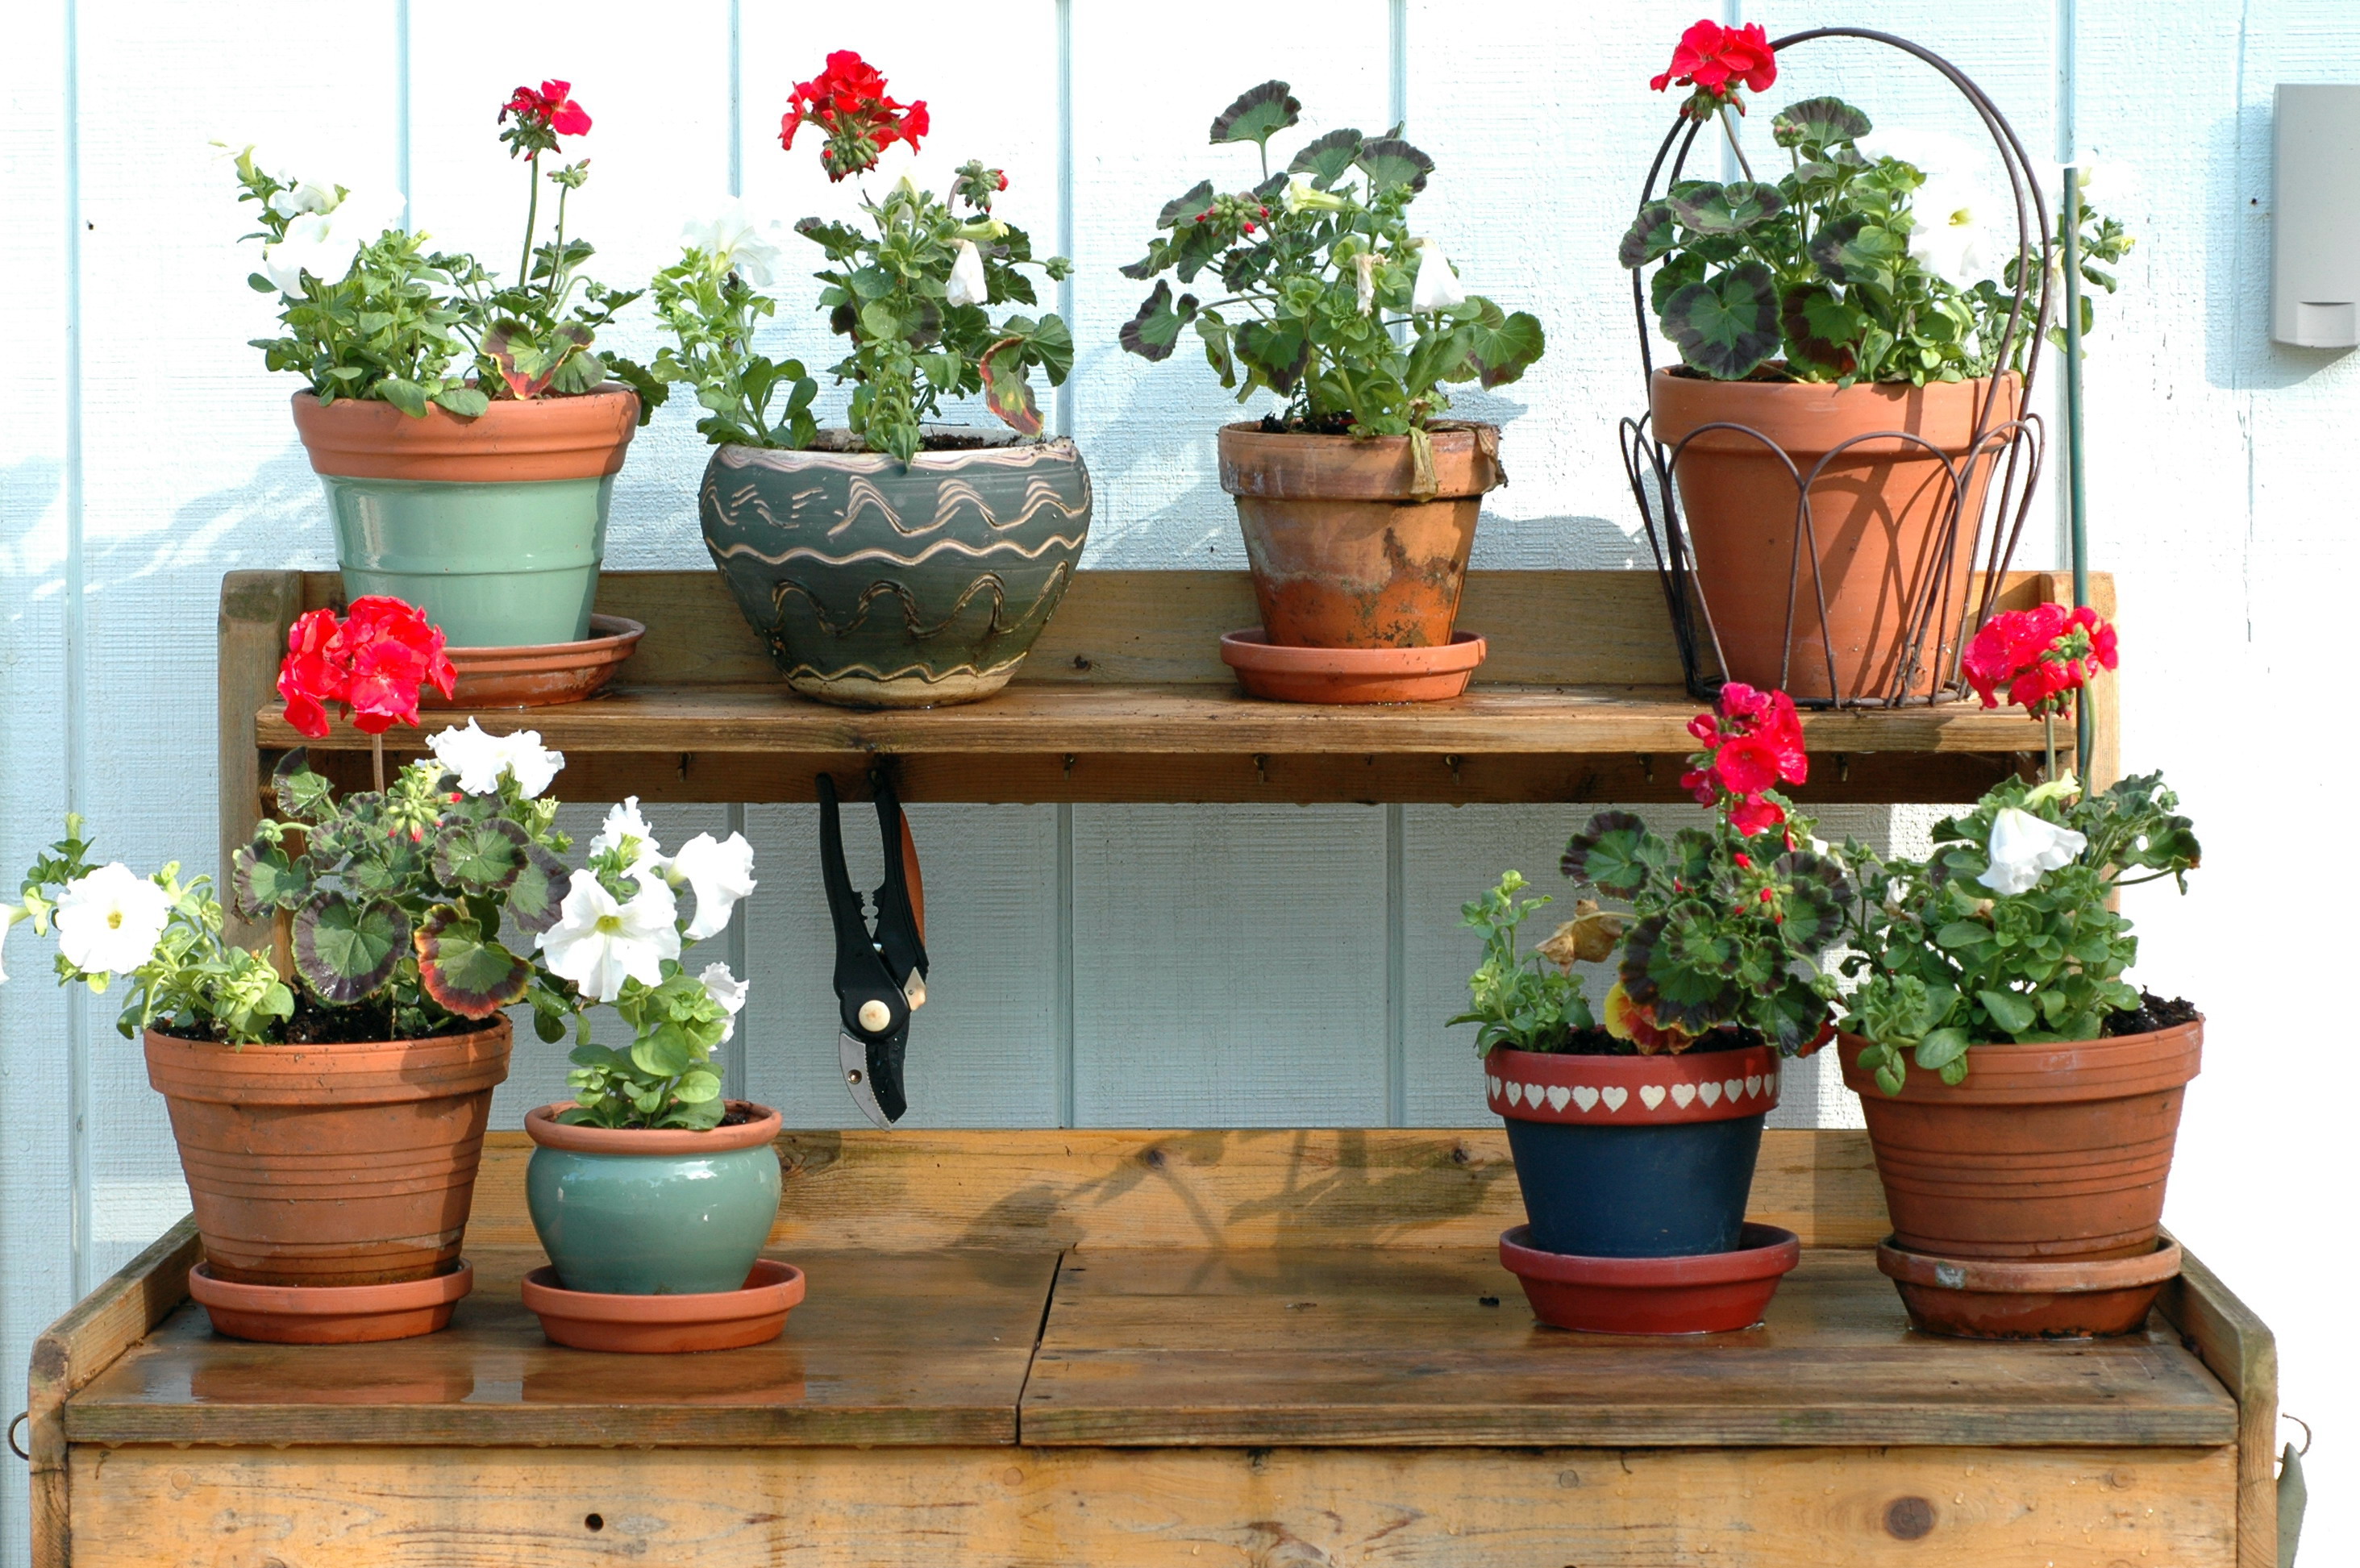 Potting bench table with potted plants display